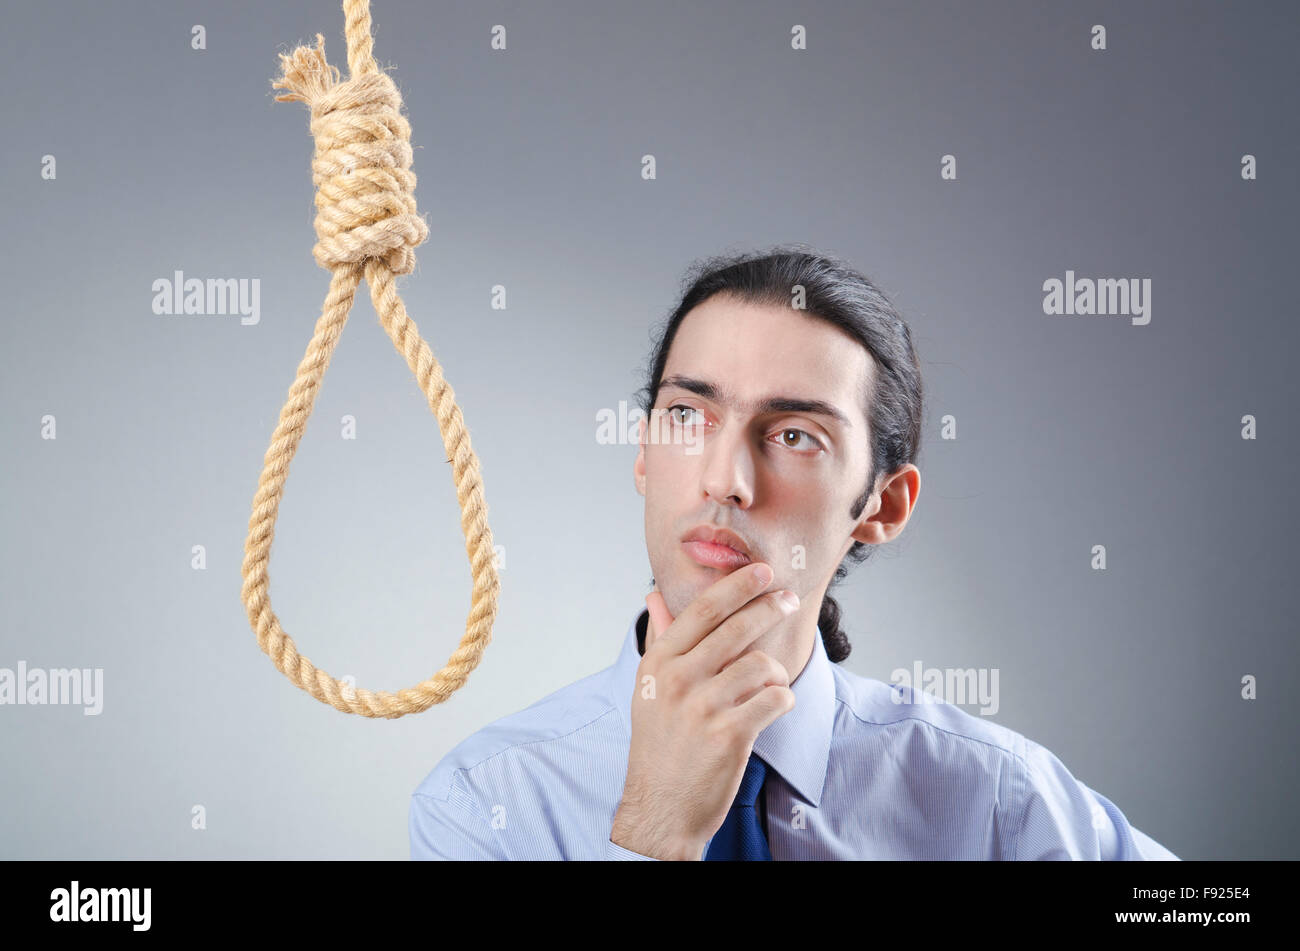 businessman-committing-suicide-through-hanging-F925E4.jpg